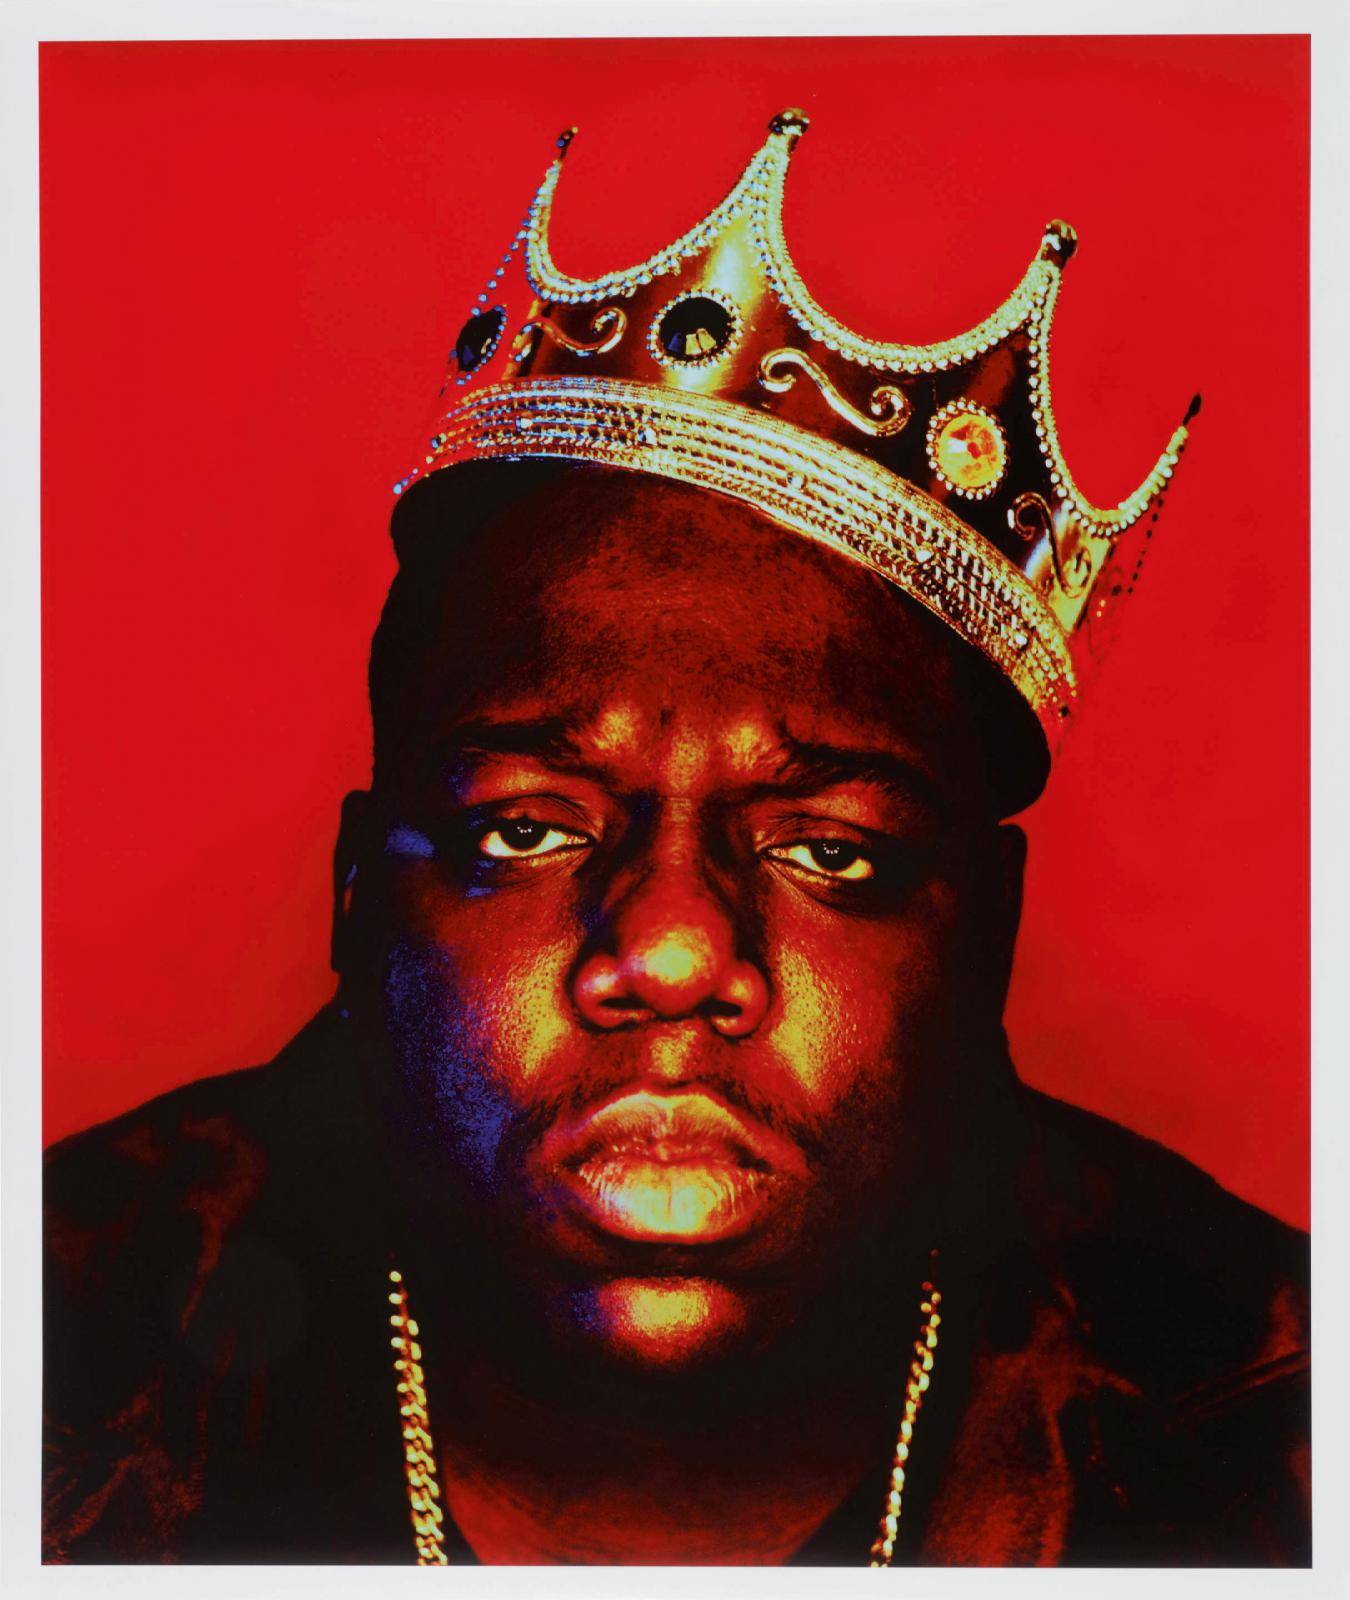 Rapper Notorious B.I.G. is seen in this 1997 photo titled 'Notorious B.I.G as the K.O.N.Y' by Barron Claiborne